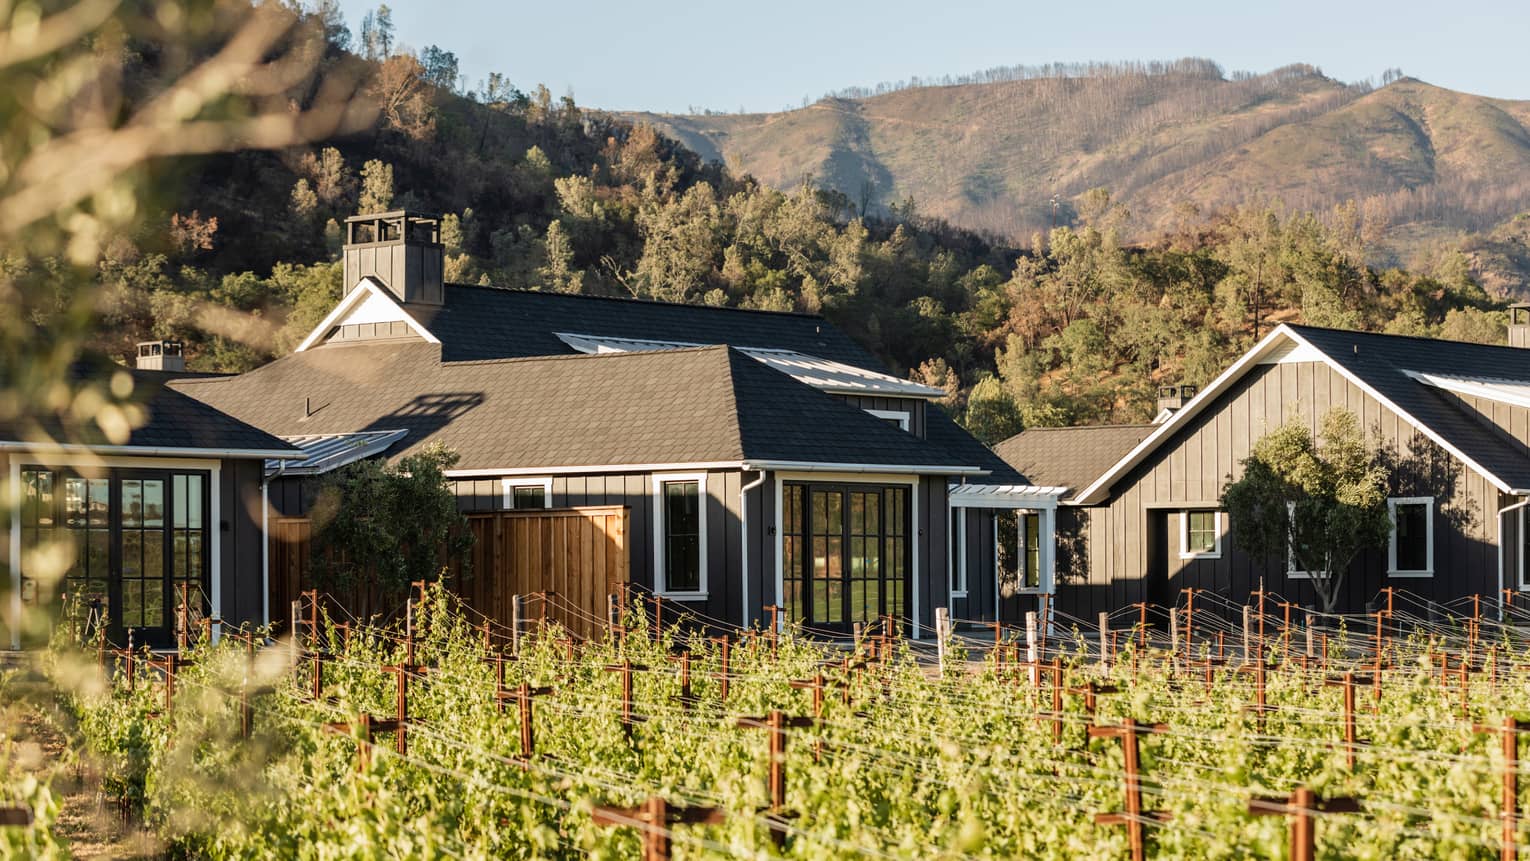 Single family home in wine country, rows of grape vines, mountain views